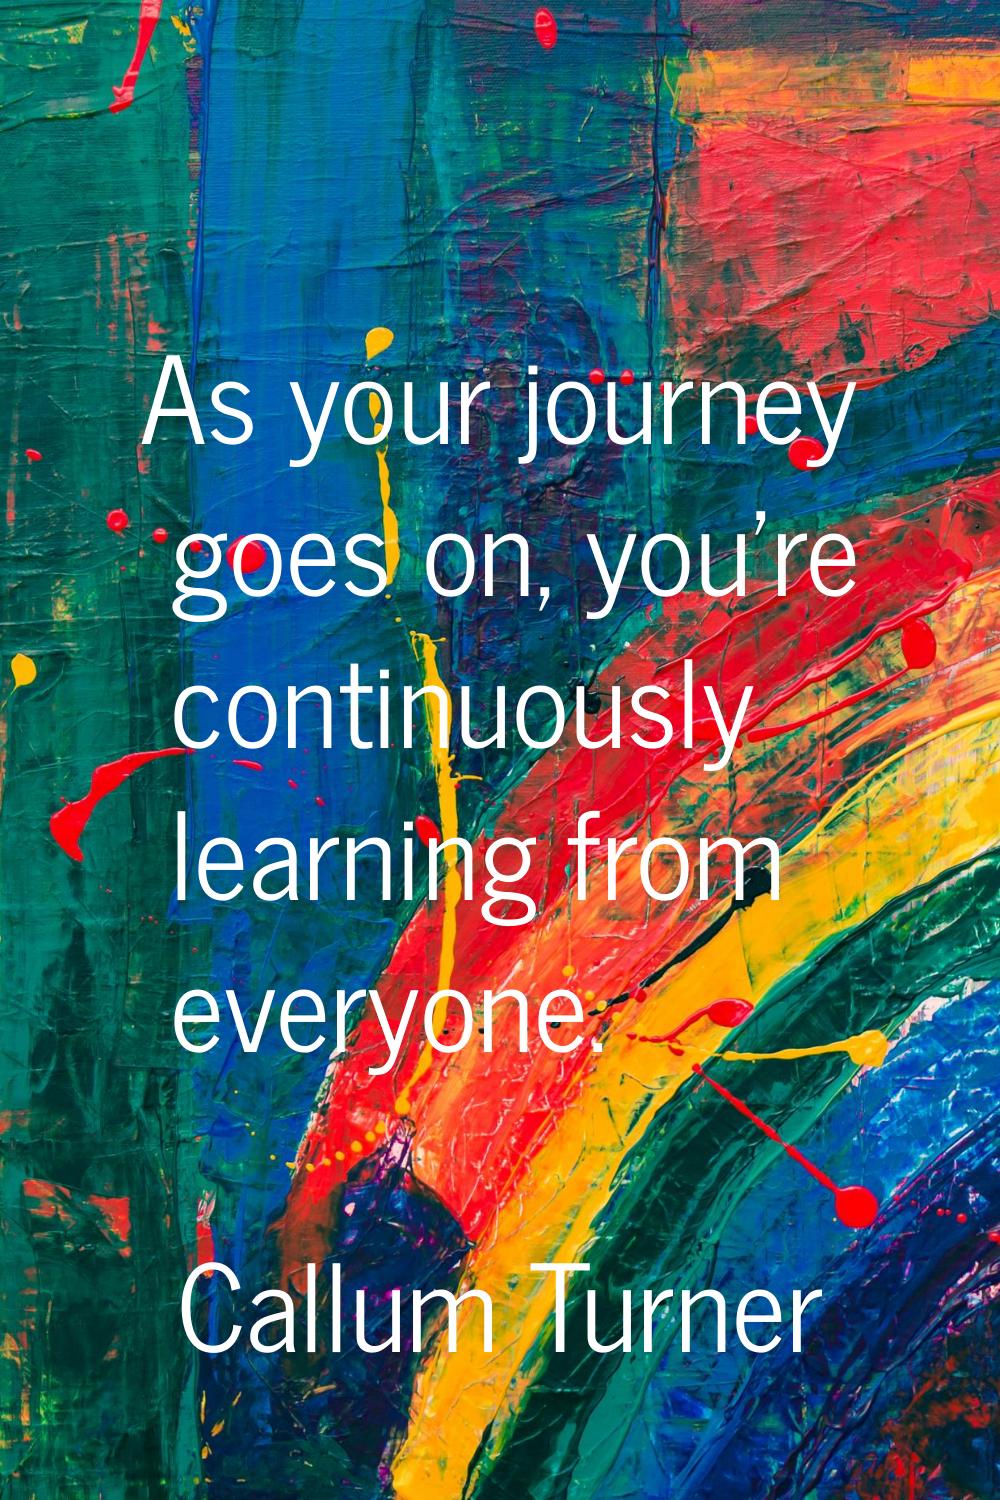 As your journey goes on, you're continuously learning from everyone.